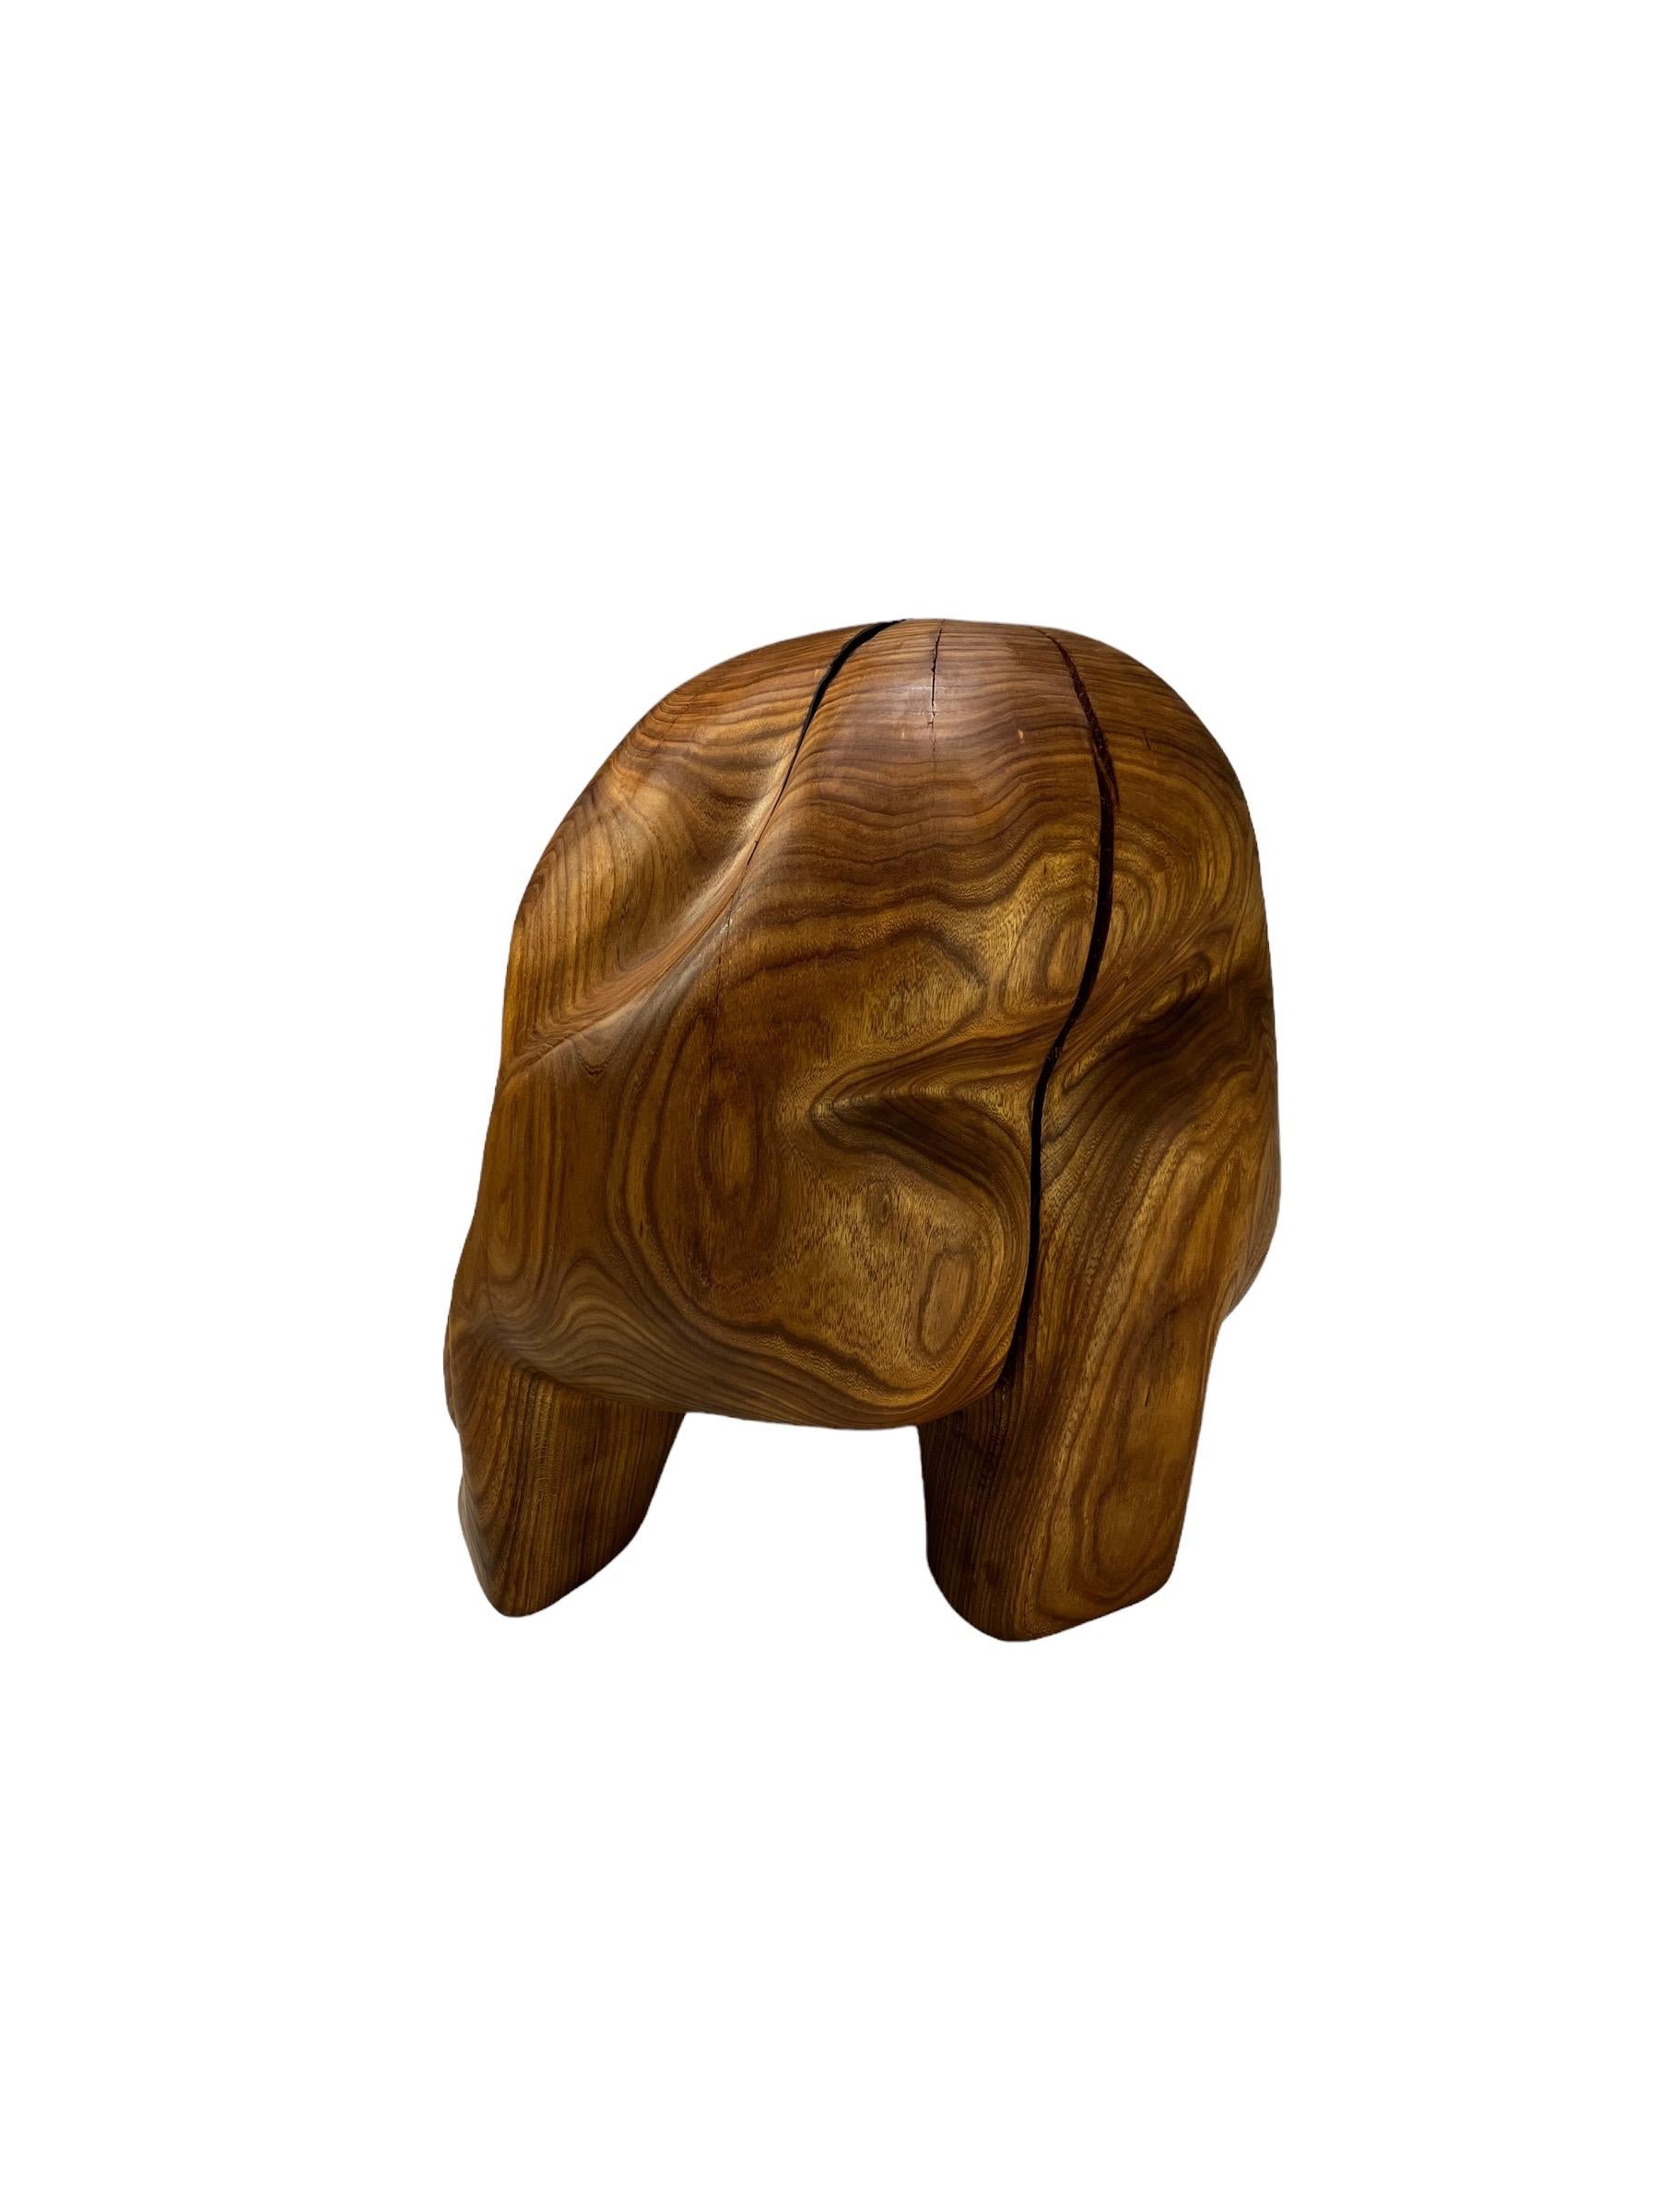 Swedish Contemporary sculptural carved wooden stool 